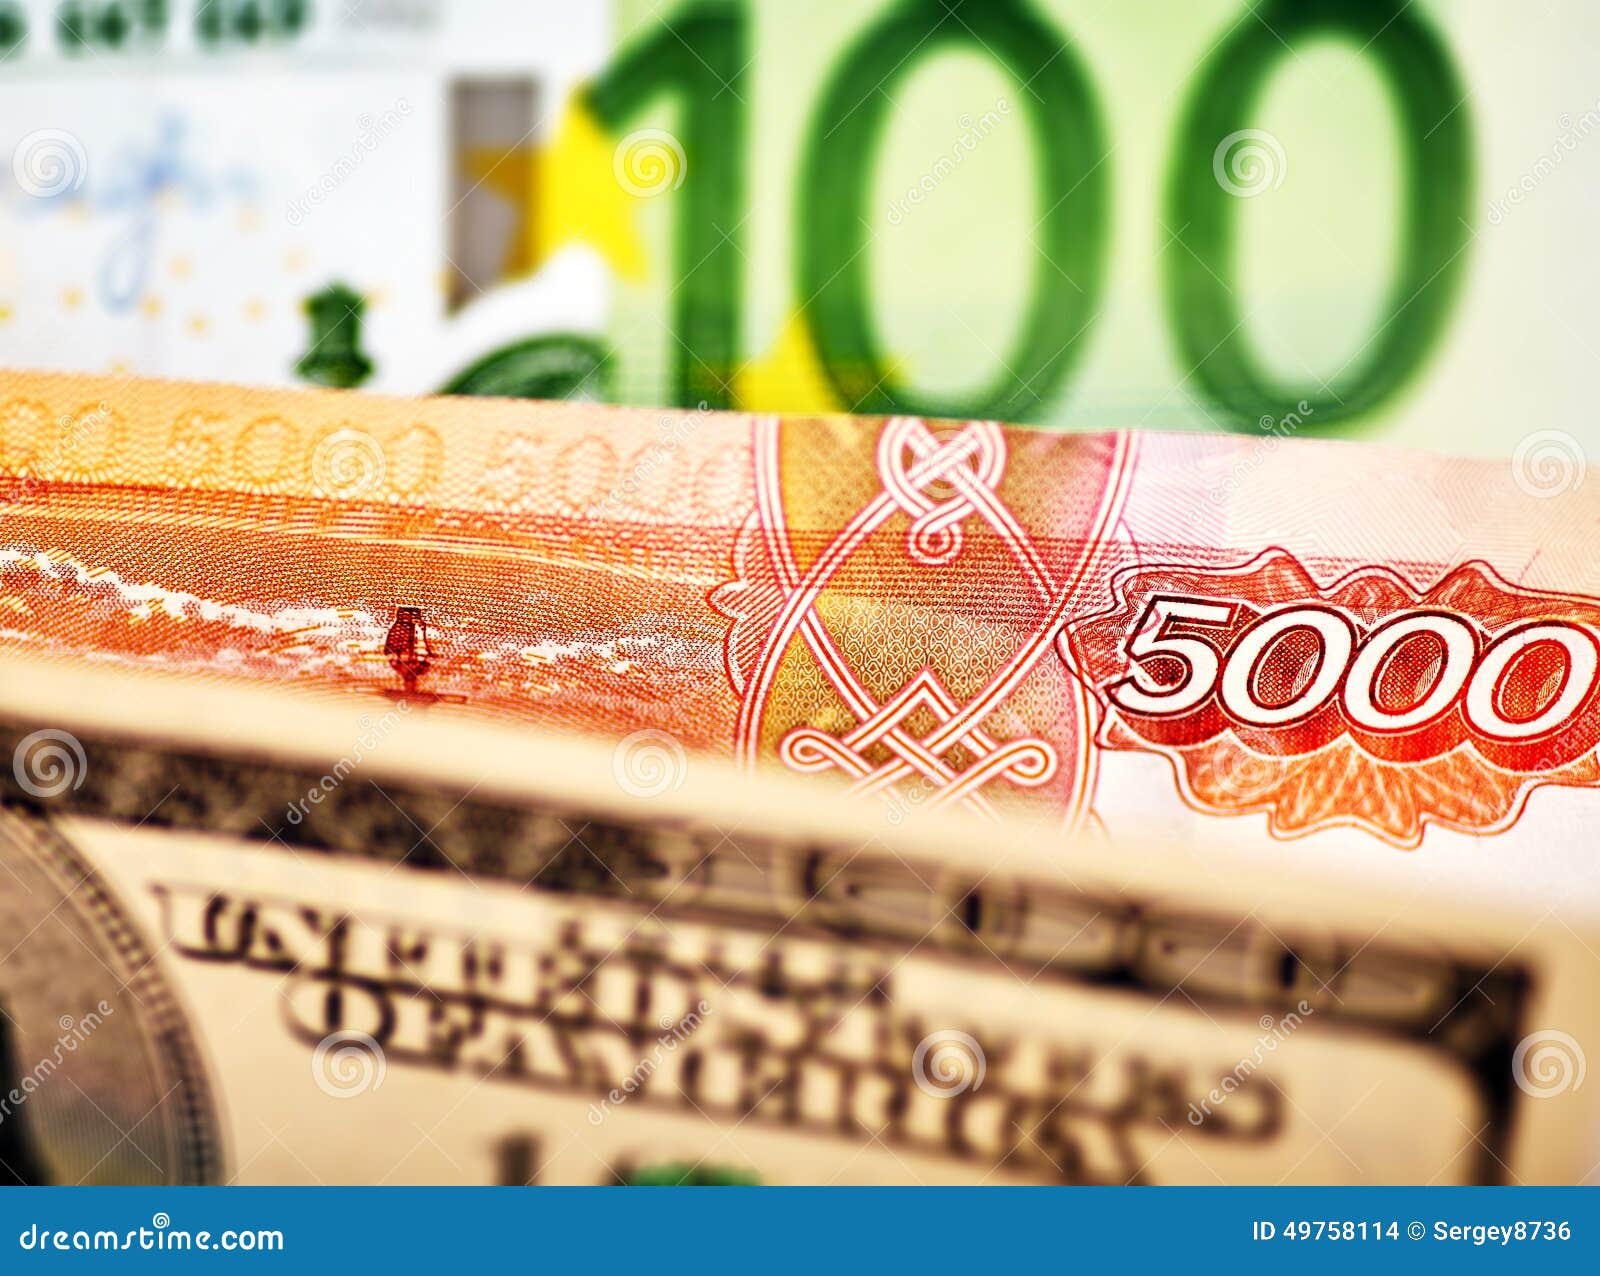 Convert Russian Rubles to Euros | RUB To EUR Exchange Rate